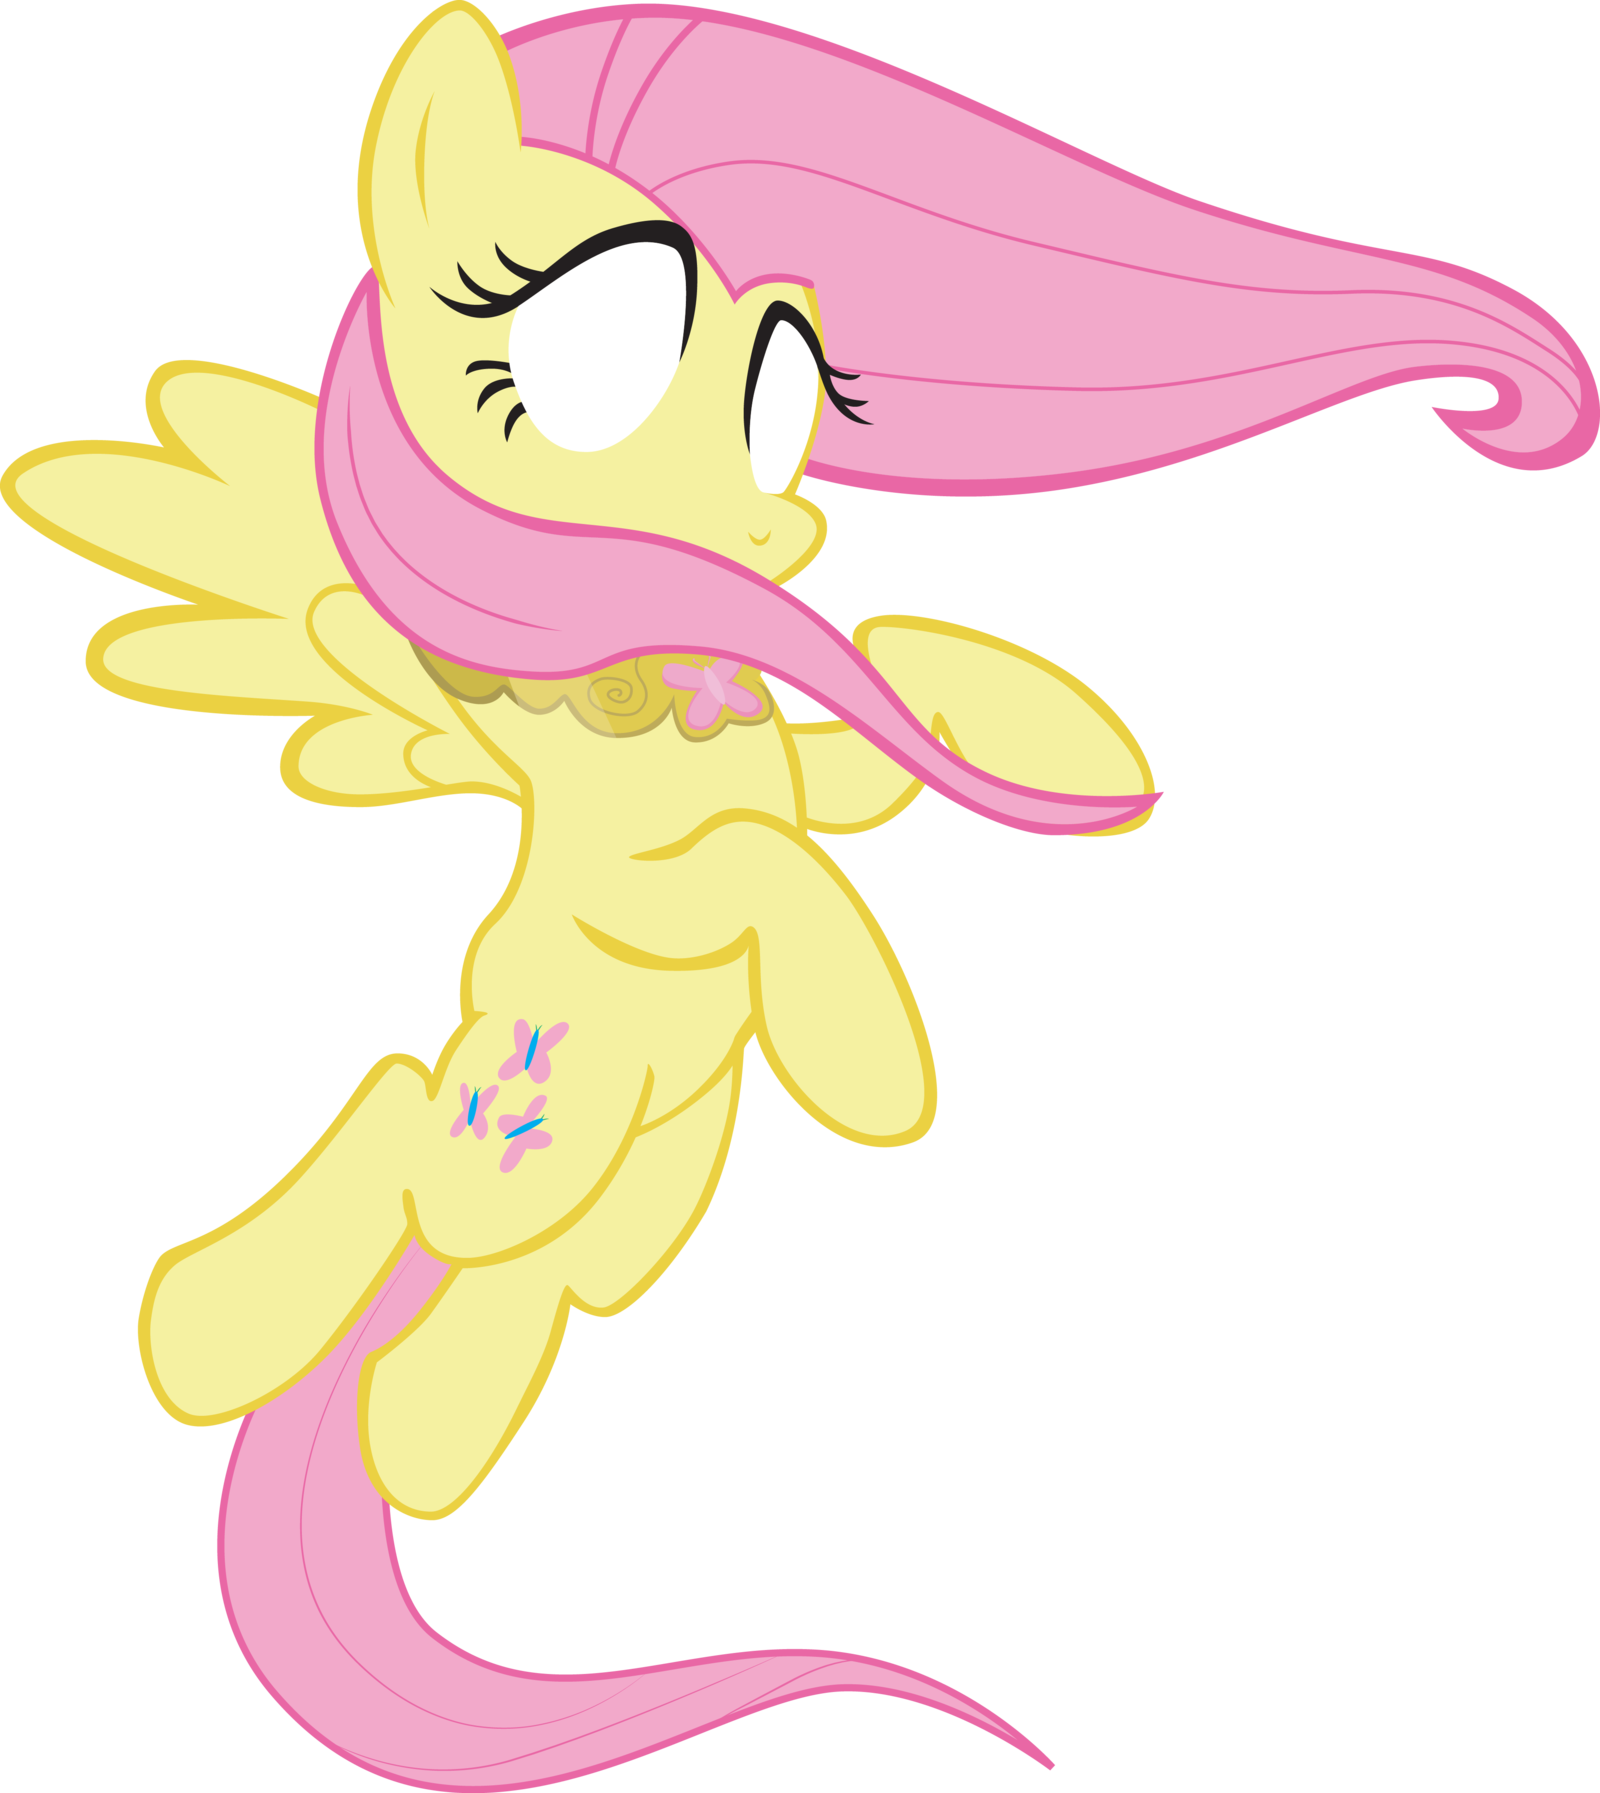 Fluttershy Hovering With Her Eyes Glowing - Mlp Fluttershy Element (1600x1793)